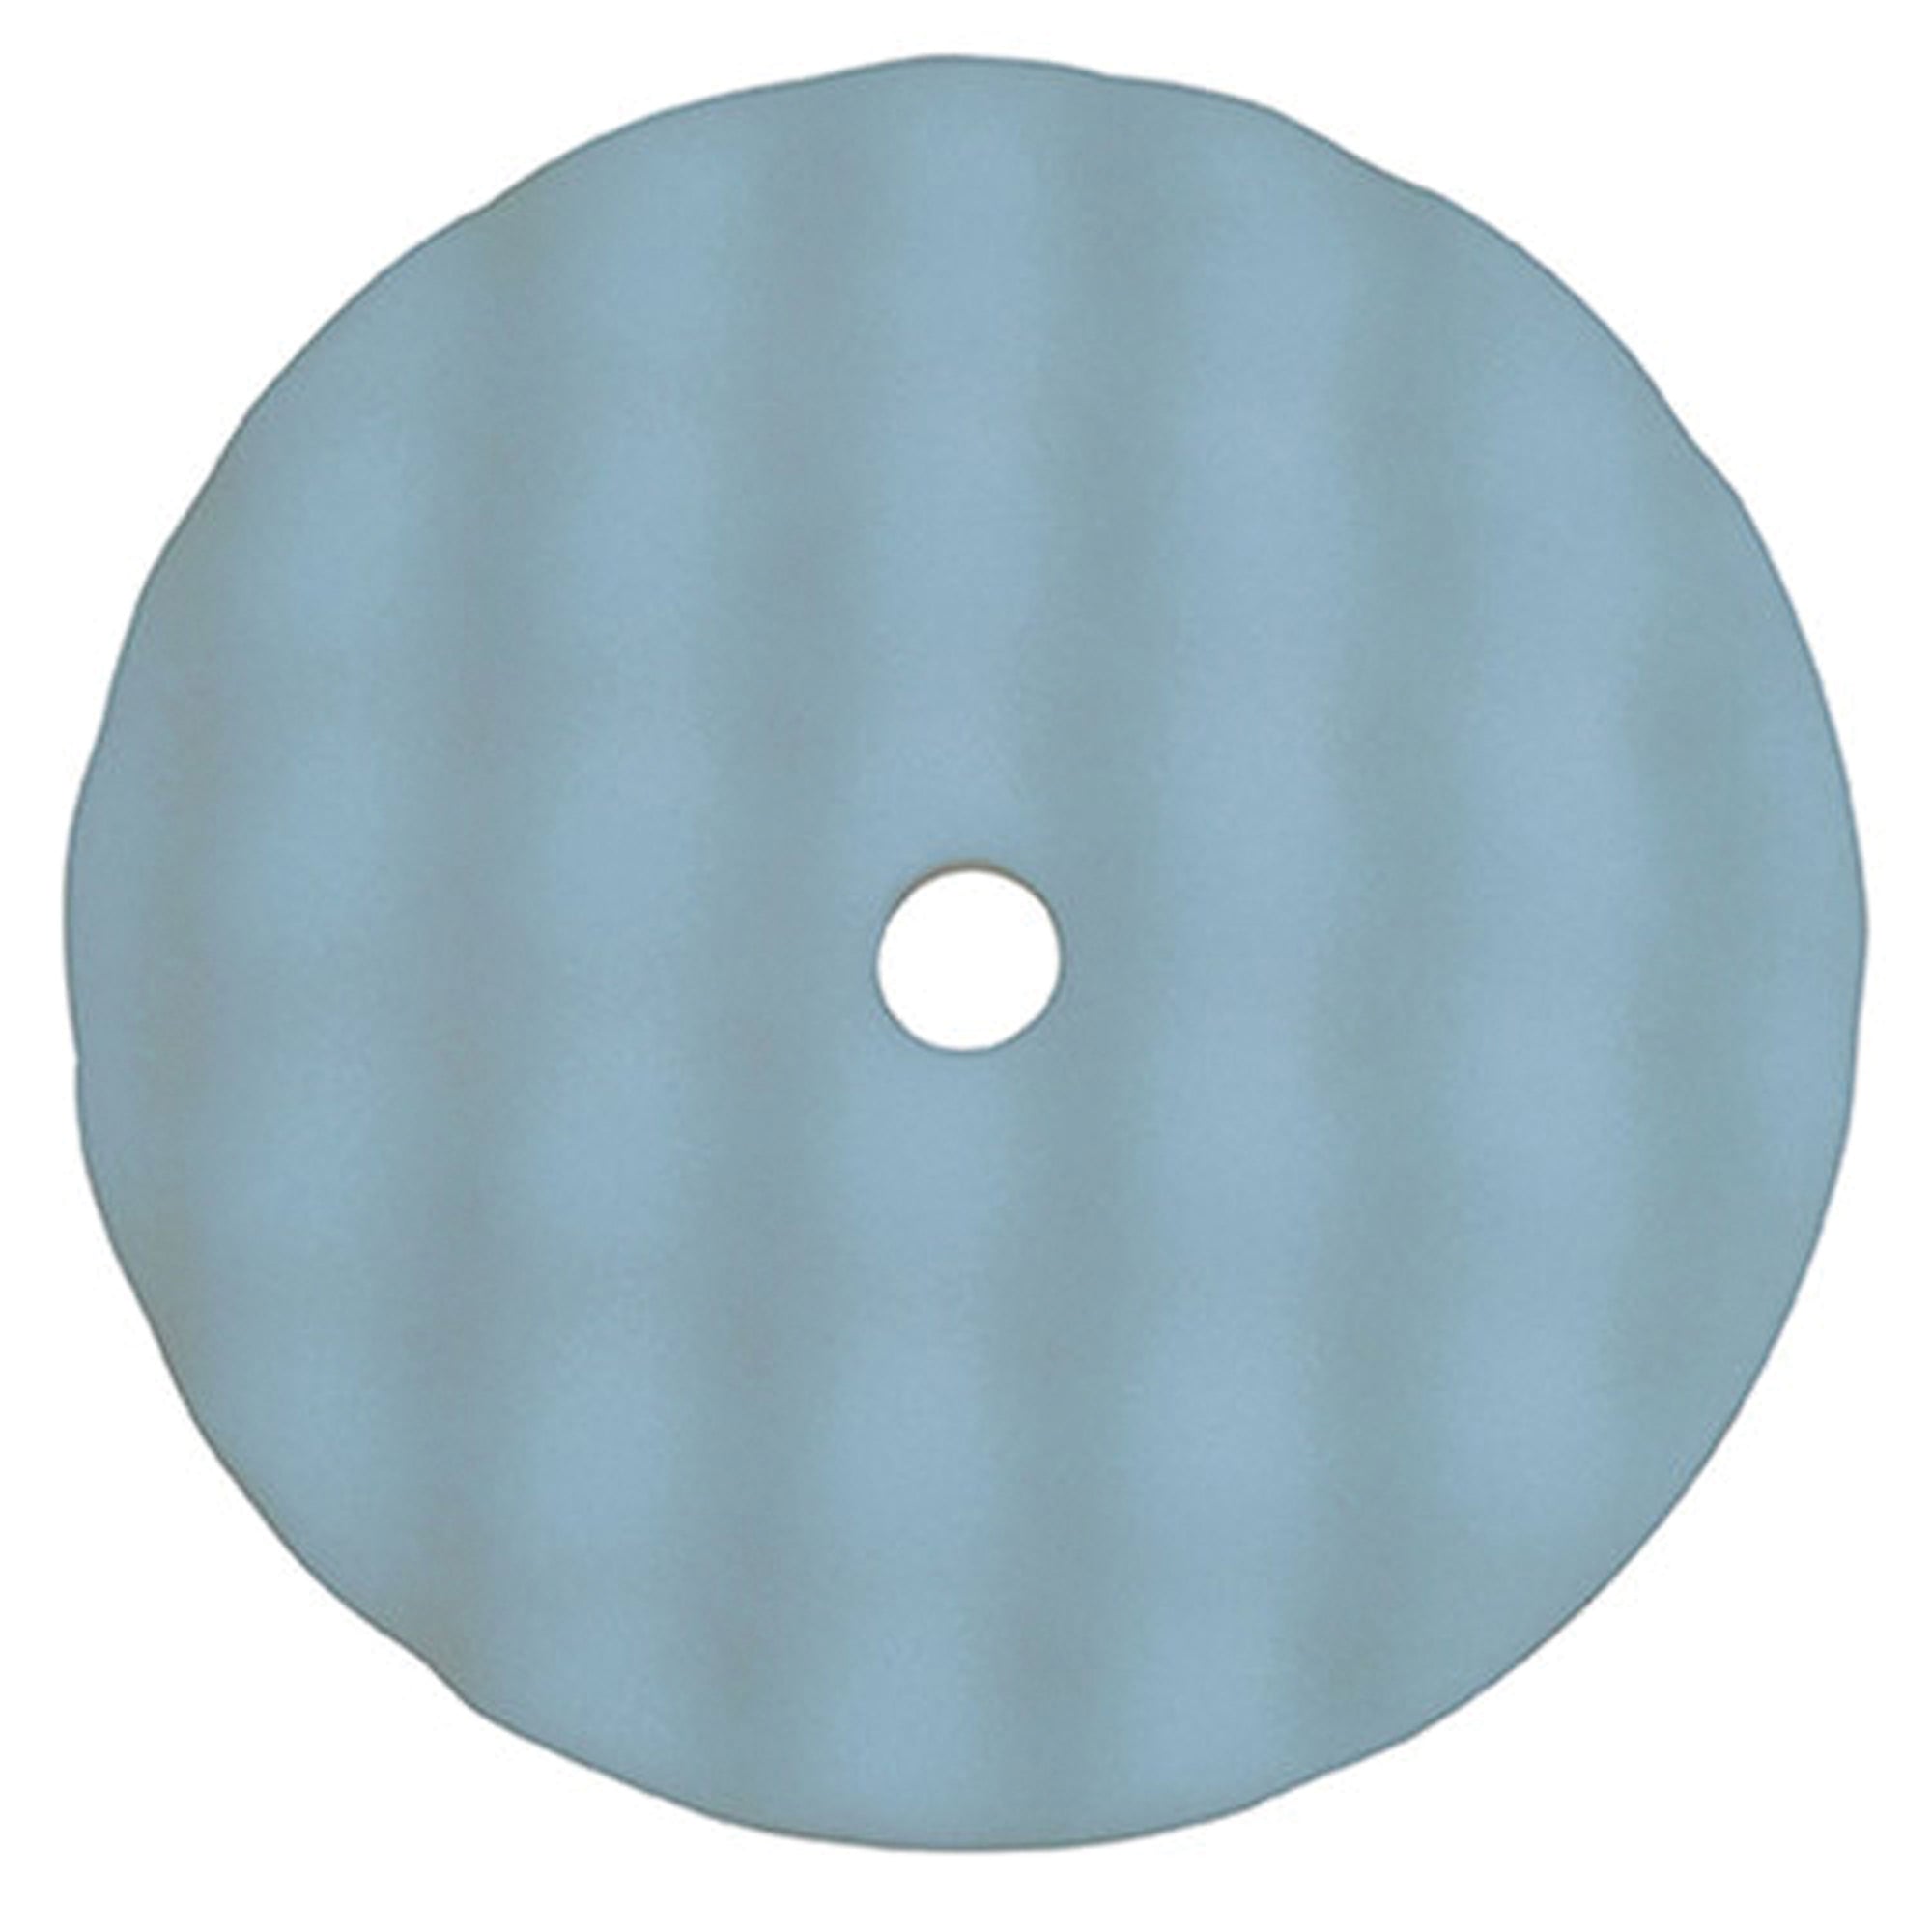 Wizards 11314 "The Ultra" Foam Buffing Pad - 8"